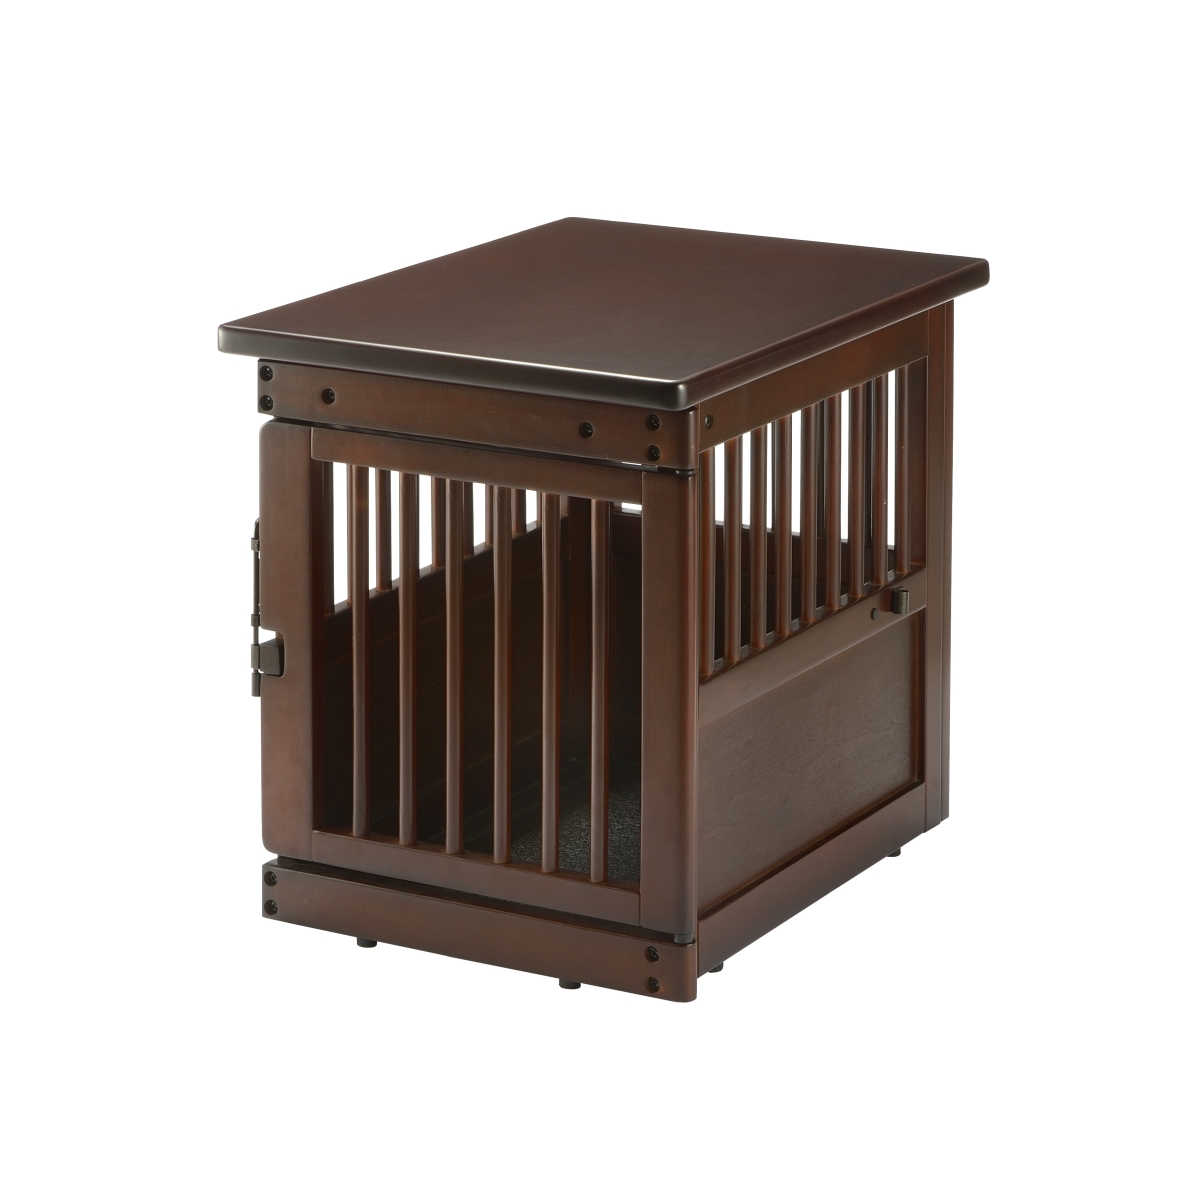 Picture of Richell 80004 Richell Wooden End Table Crate Small - Dark Brown